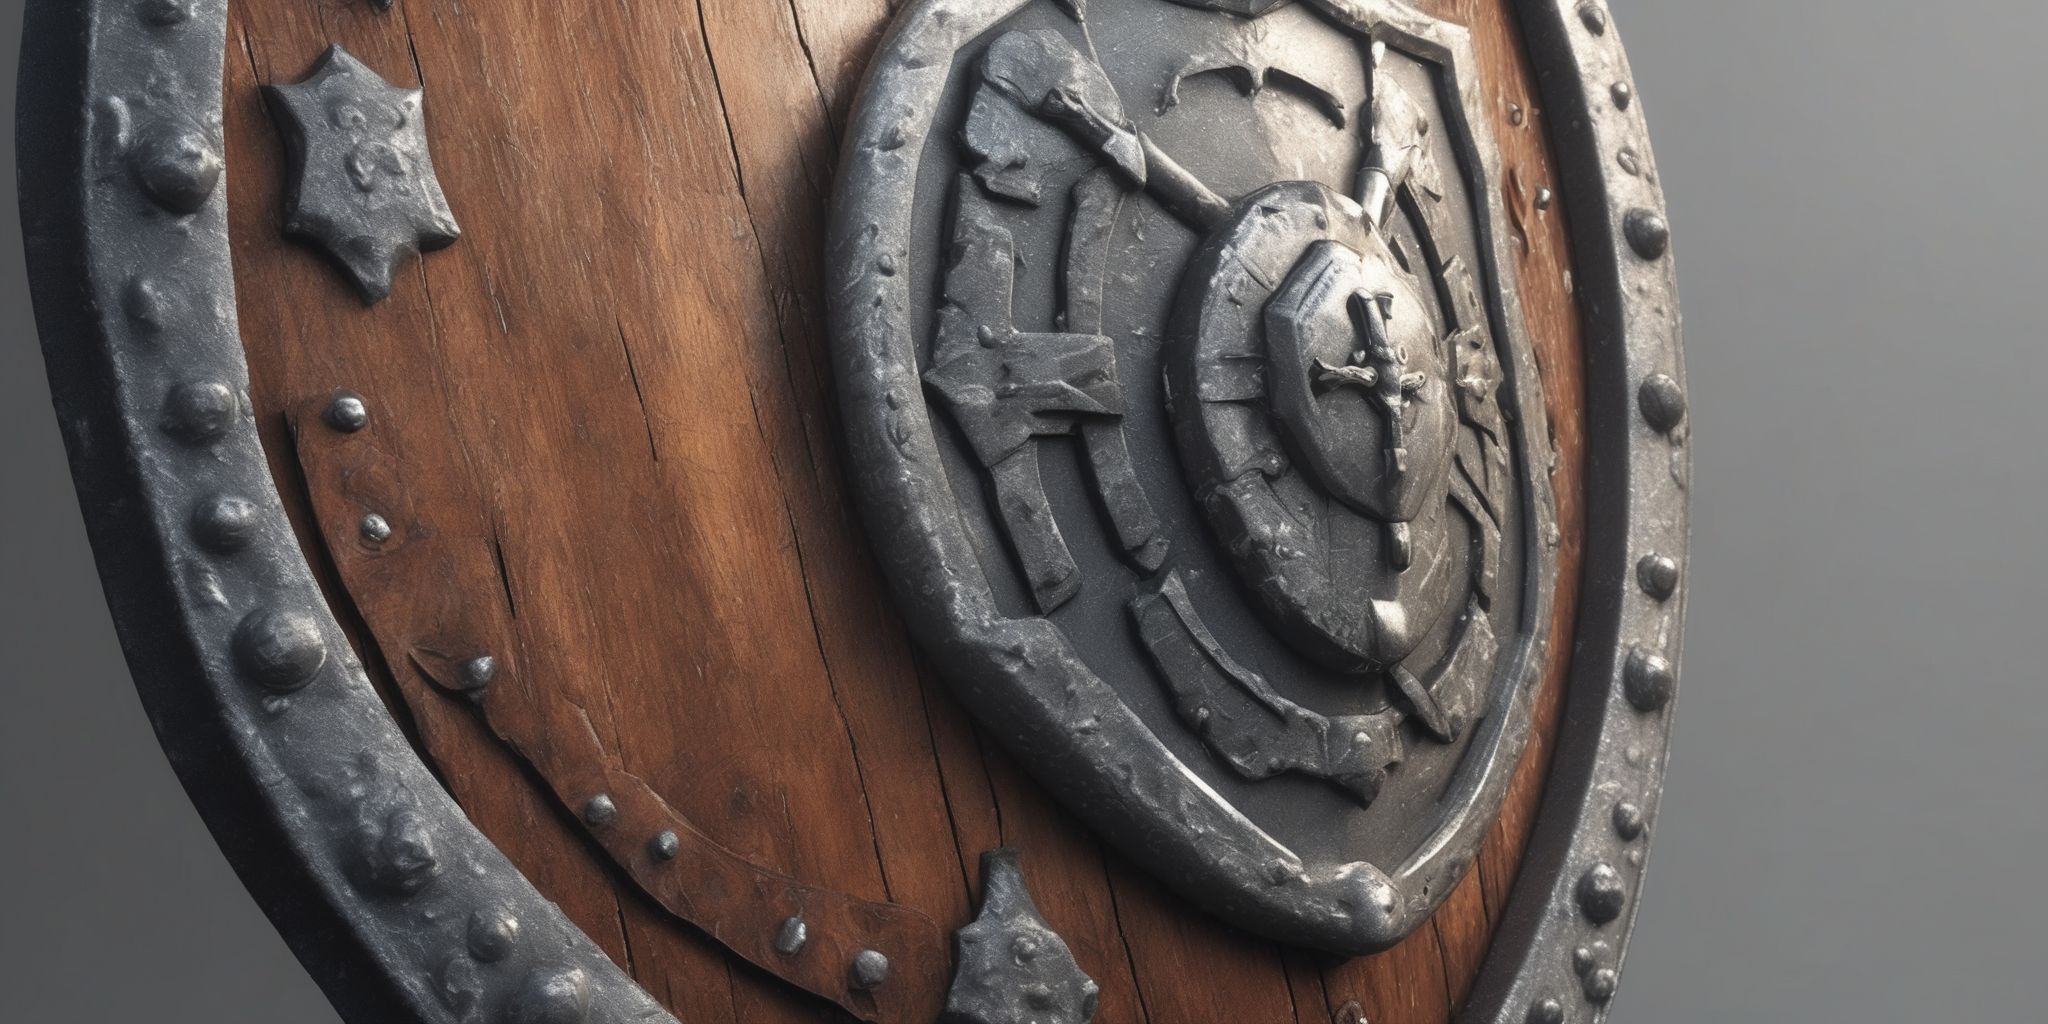 Shield  in realistic, photographic style